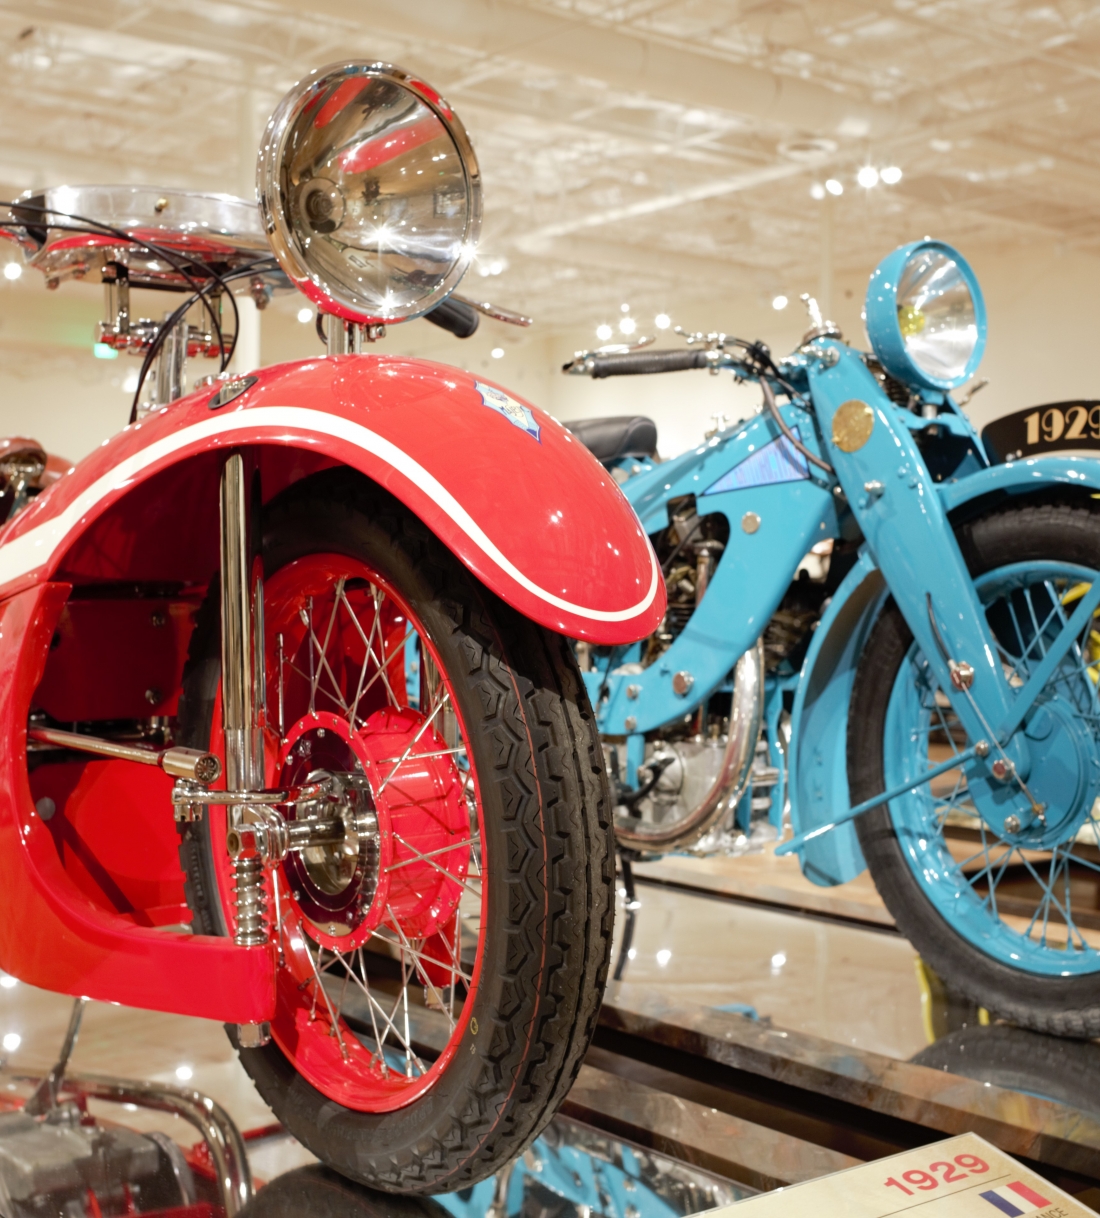 A view of some of the bikes available to view at the Haas Moto Museum